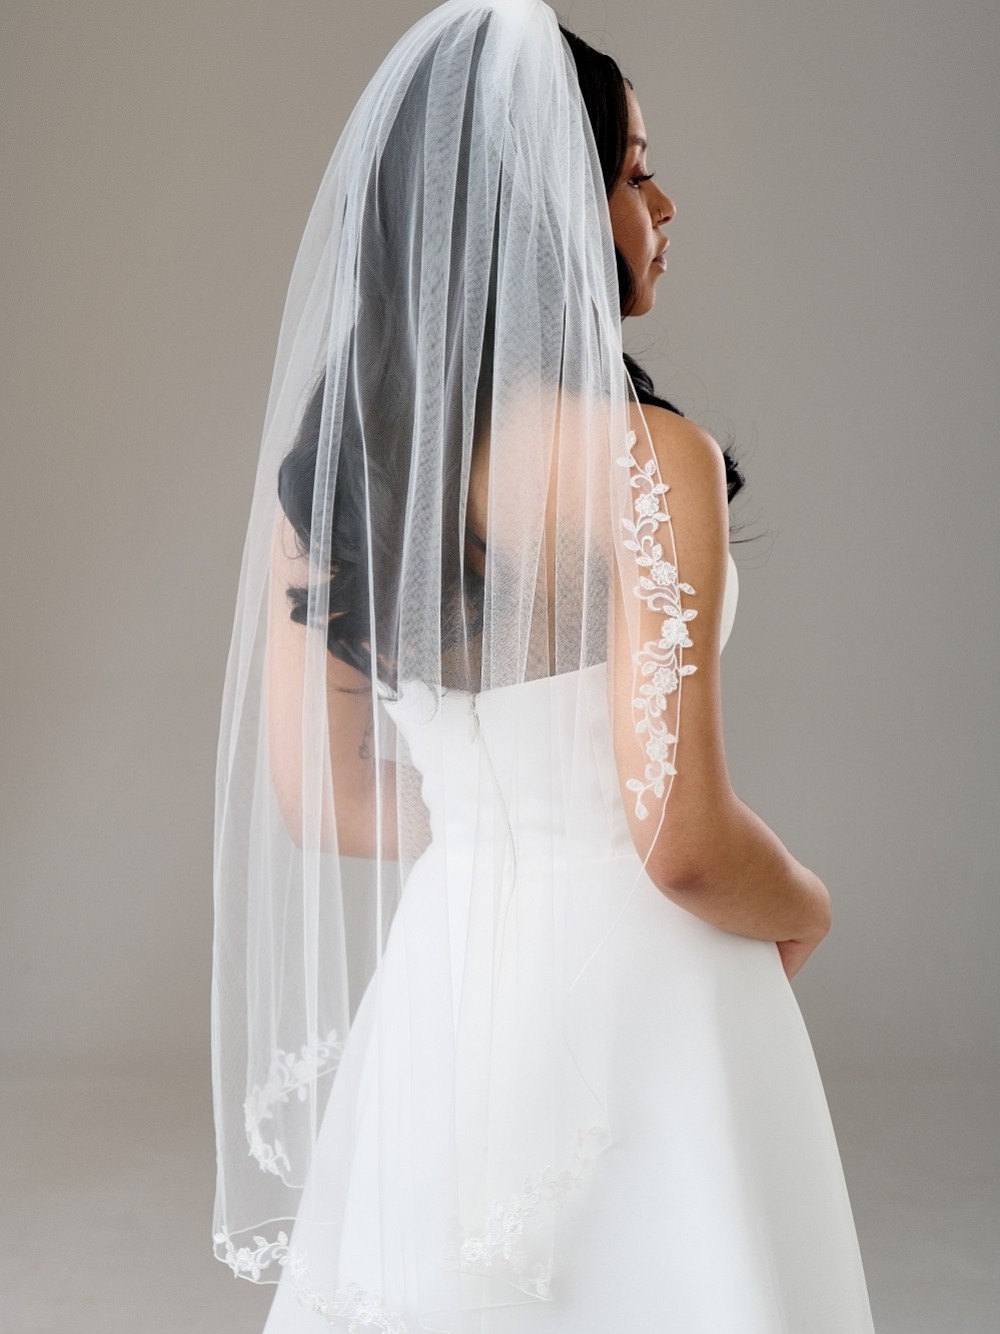 Photograph of Montrose Ivory Single Tier Corded Edge Veil with Floral Lace Motifs